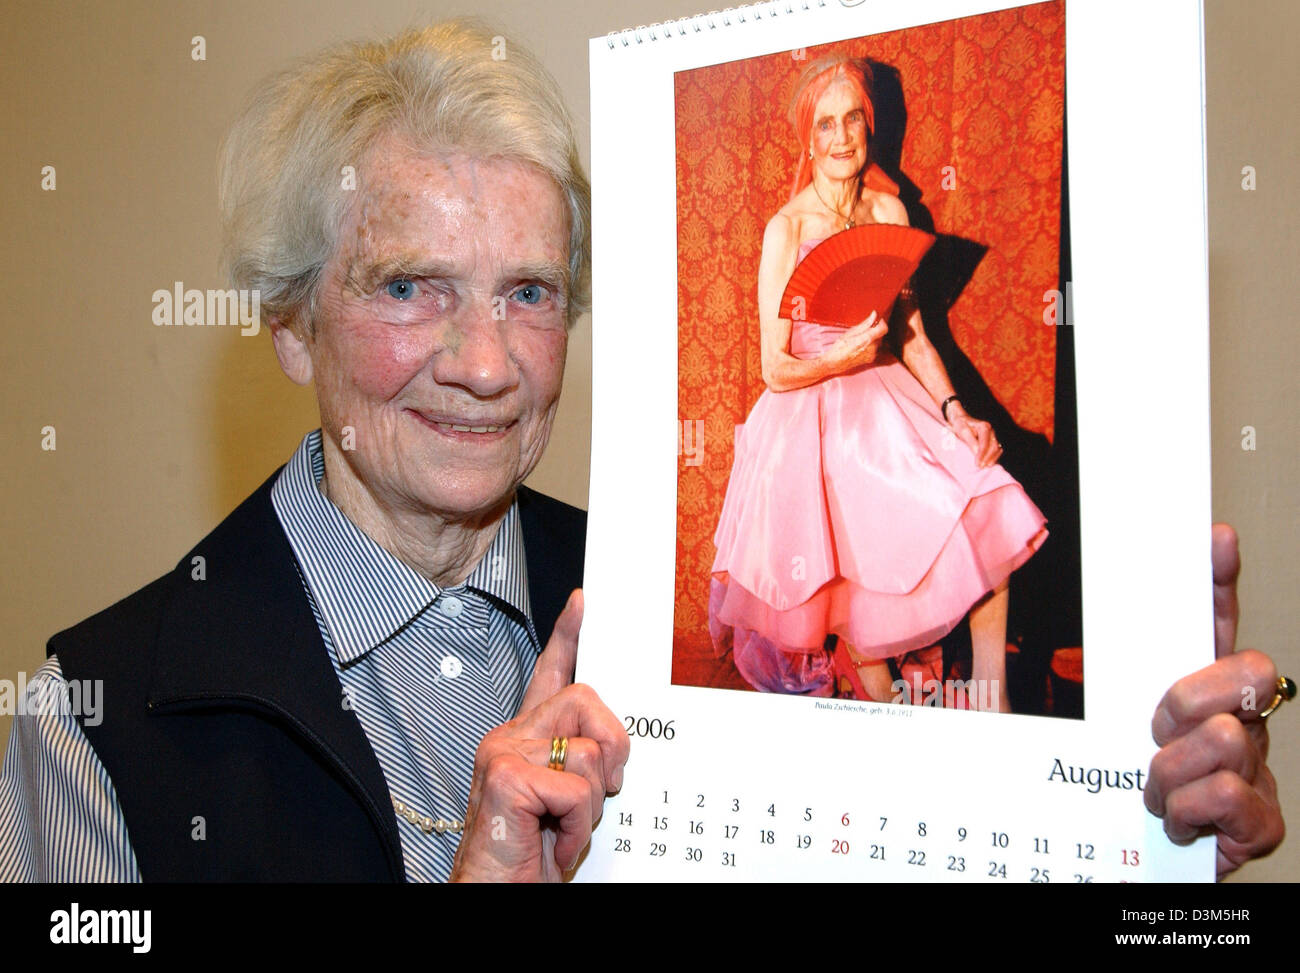 (dpa) - 94-year-old Paula Zschische holds a calendar sheet featuring a photo of her wearing a strapless cocktail dress in Luebeck, Germany, 24 November 2005. Eleven women and one man, who are between 77 and 94 years old, from a nursing home in Luebeck were photographed for the calendar. With the proceeds they want to collect money to establish a station for old, dementia patients a Stock Photo